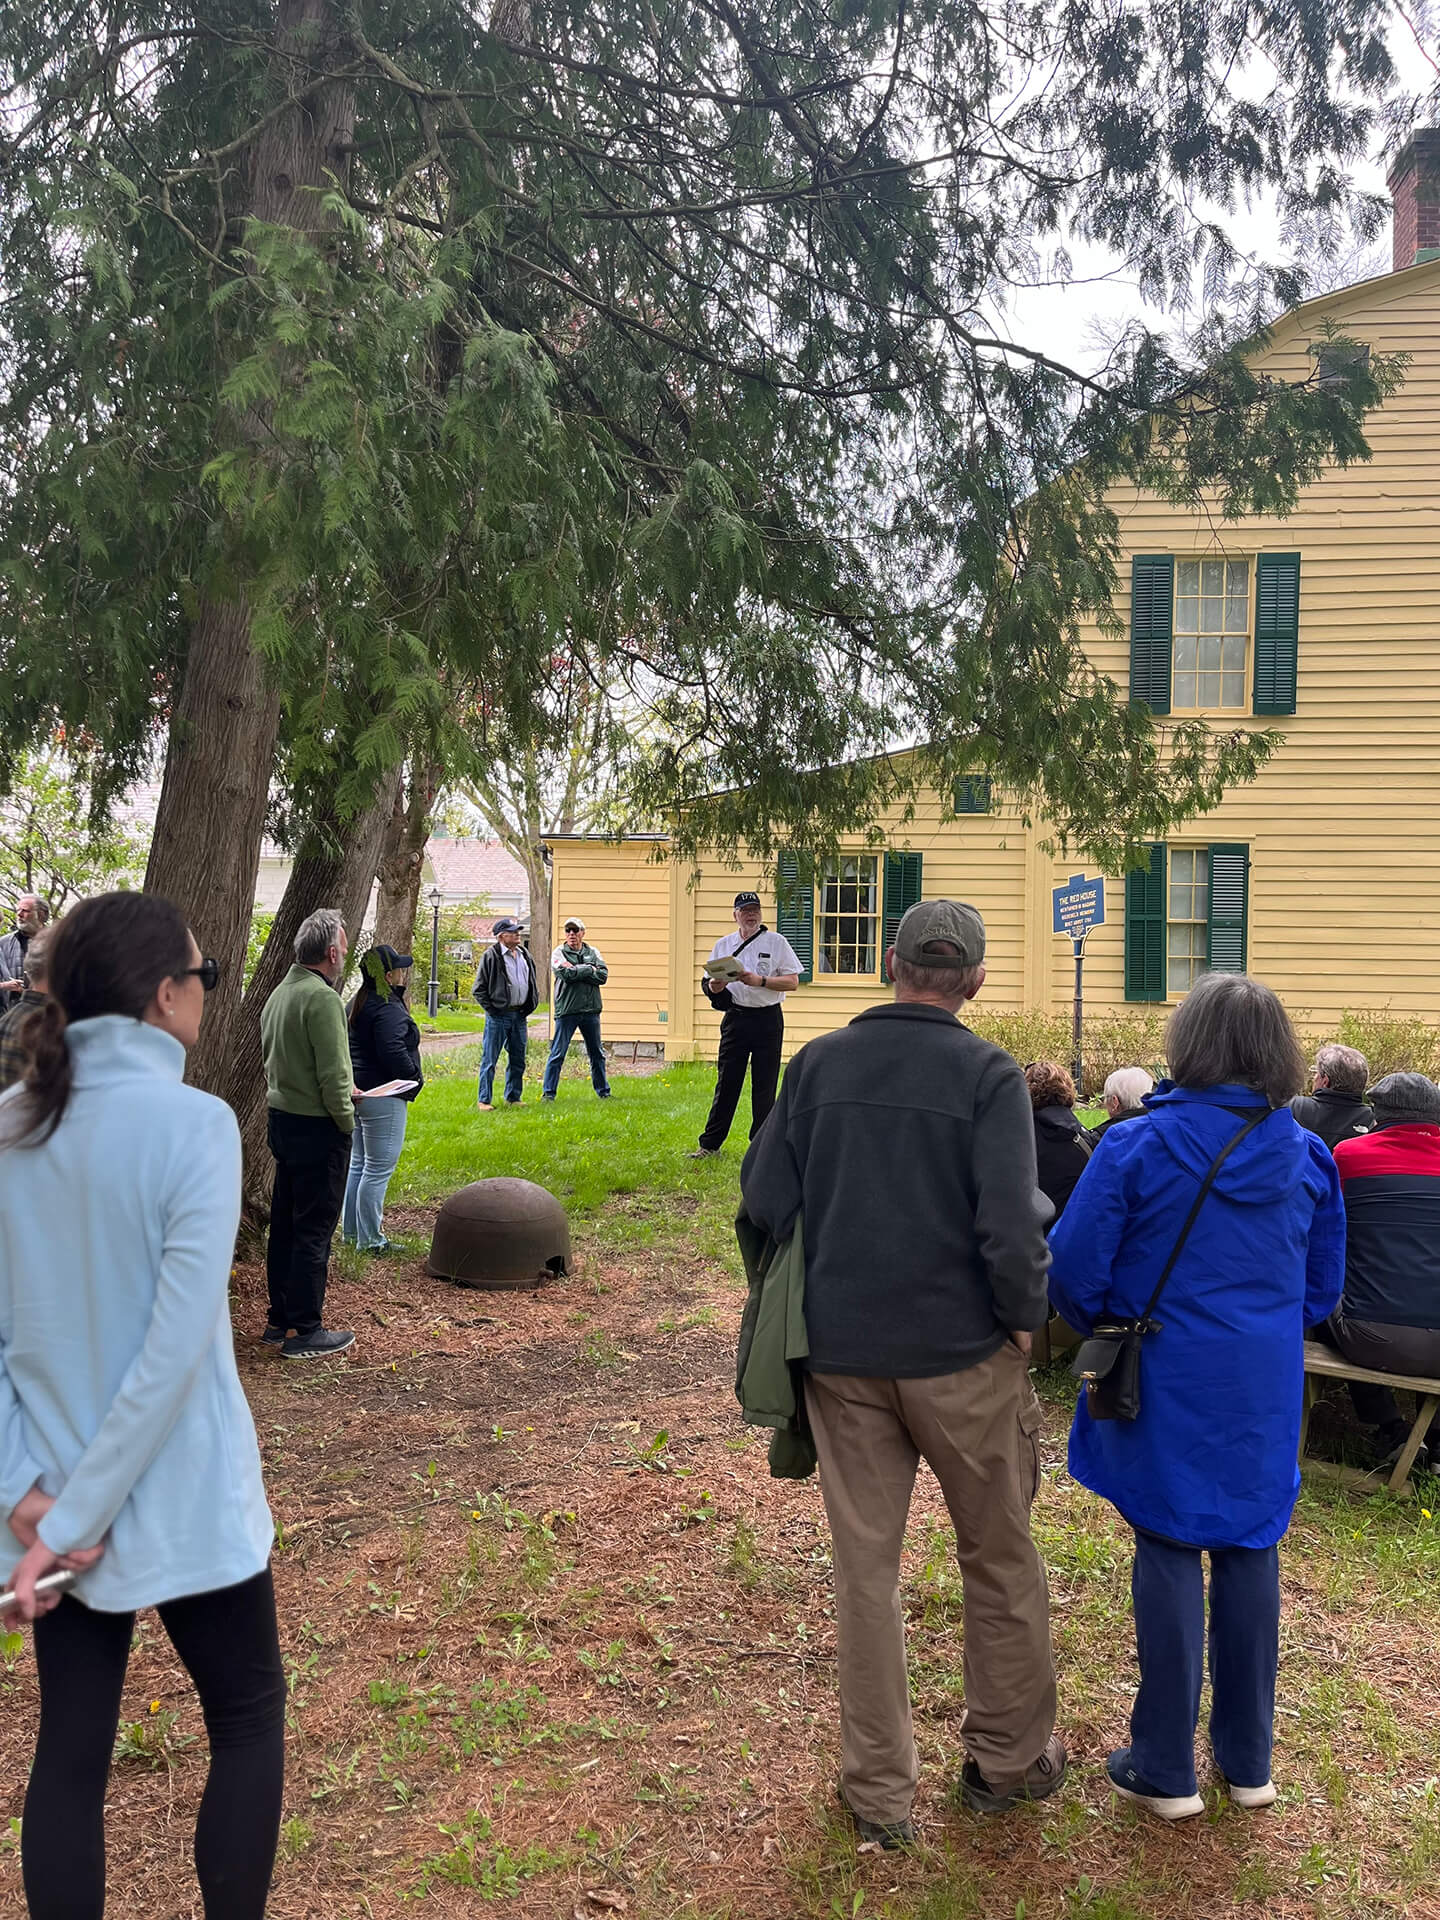 A group gathered at the The Schuyler House listening to a tour guide